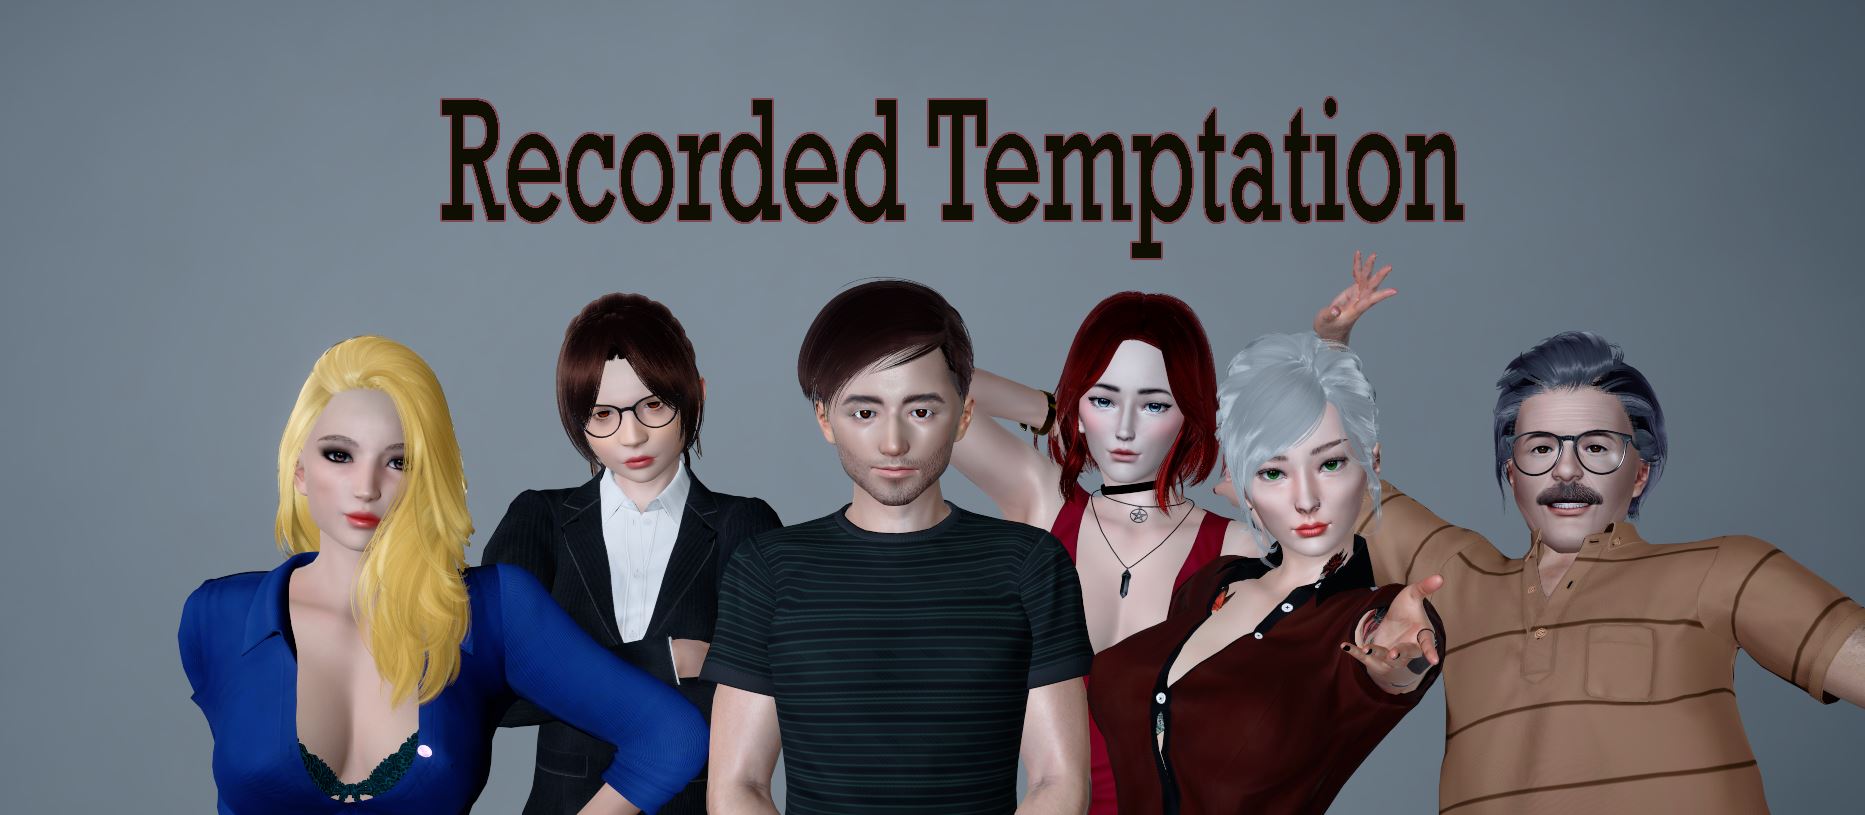 Recorded Temptation porn xxx game download cover